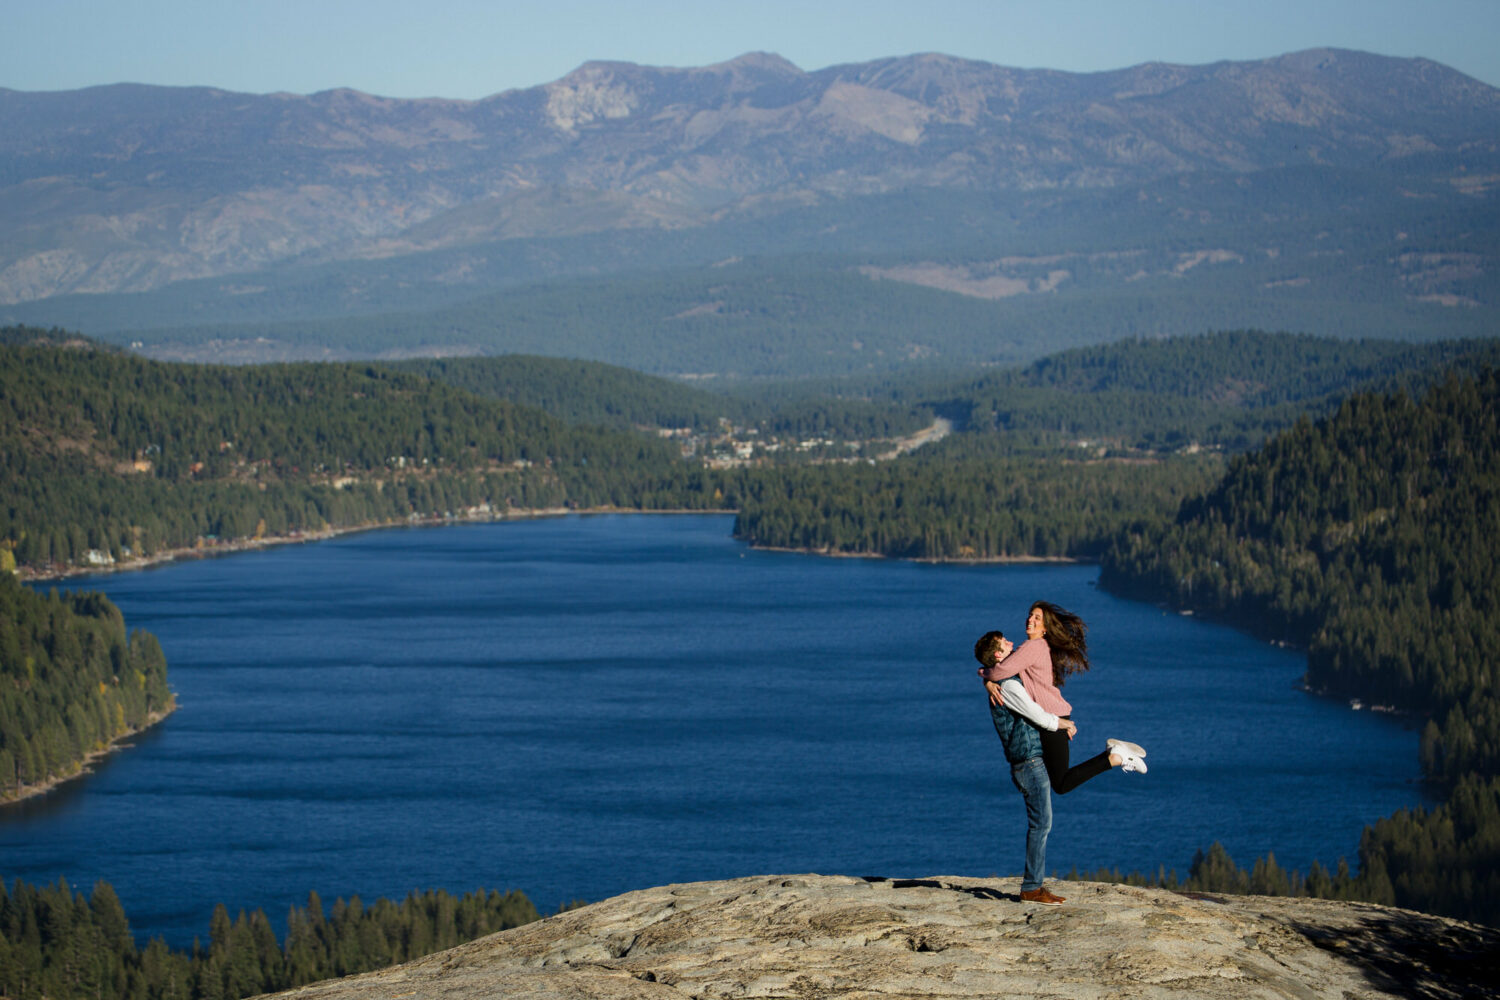 Spinning around on Cloud 9 at a Donner Summit engagement photoshoot.